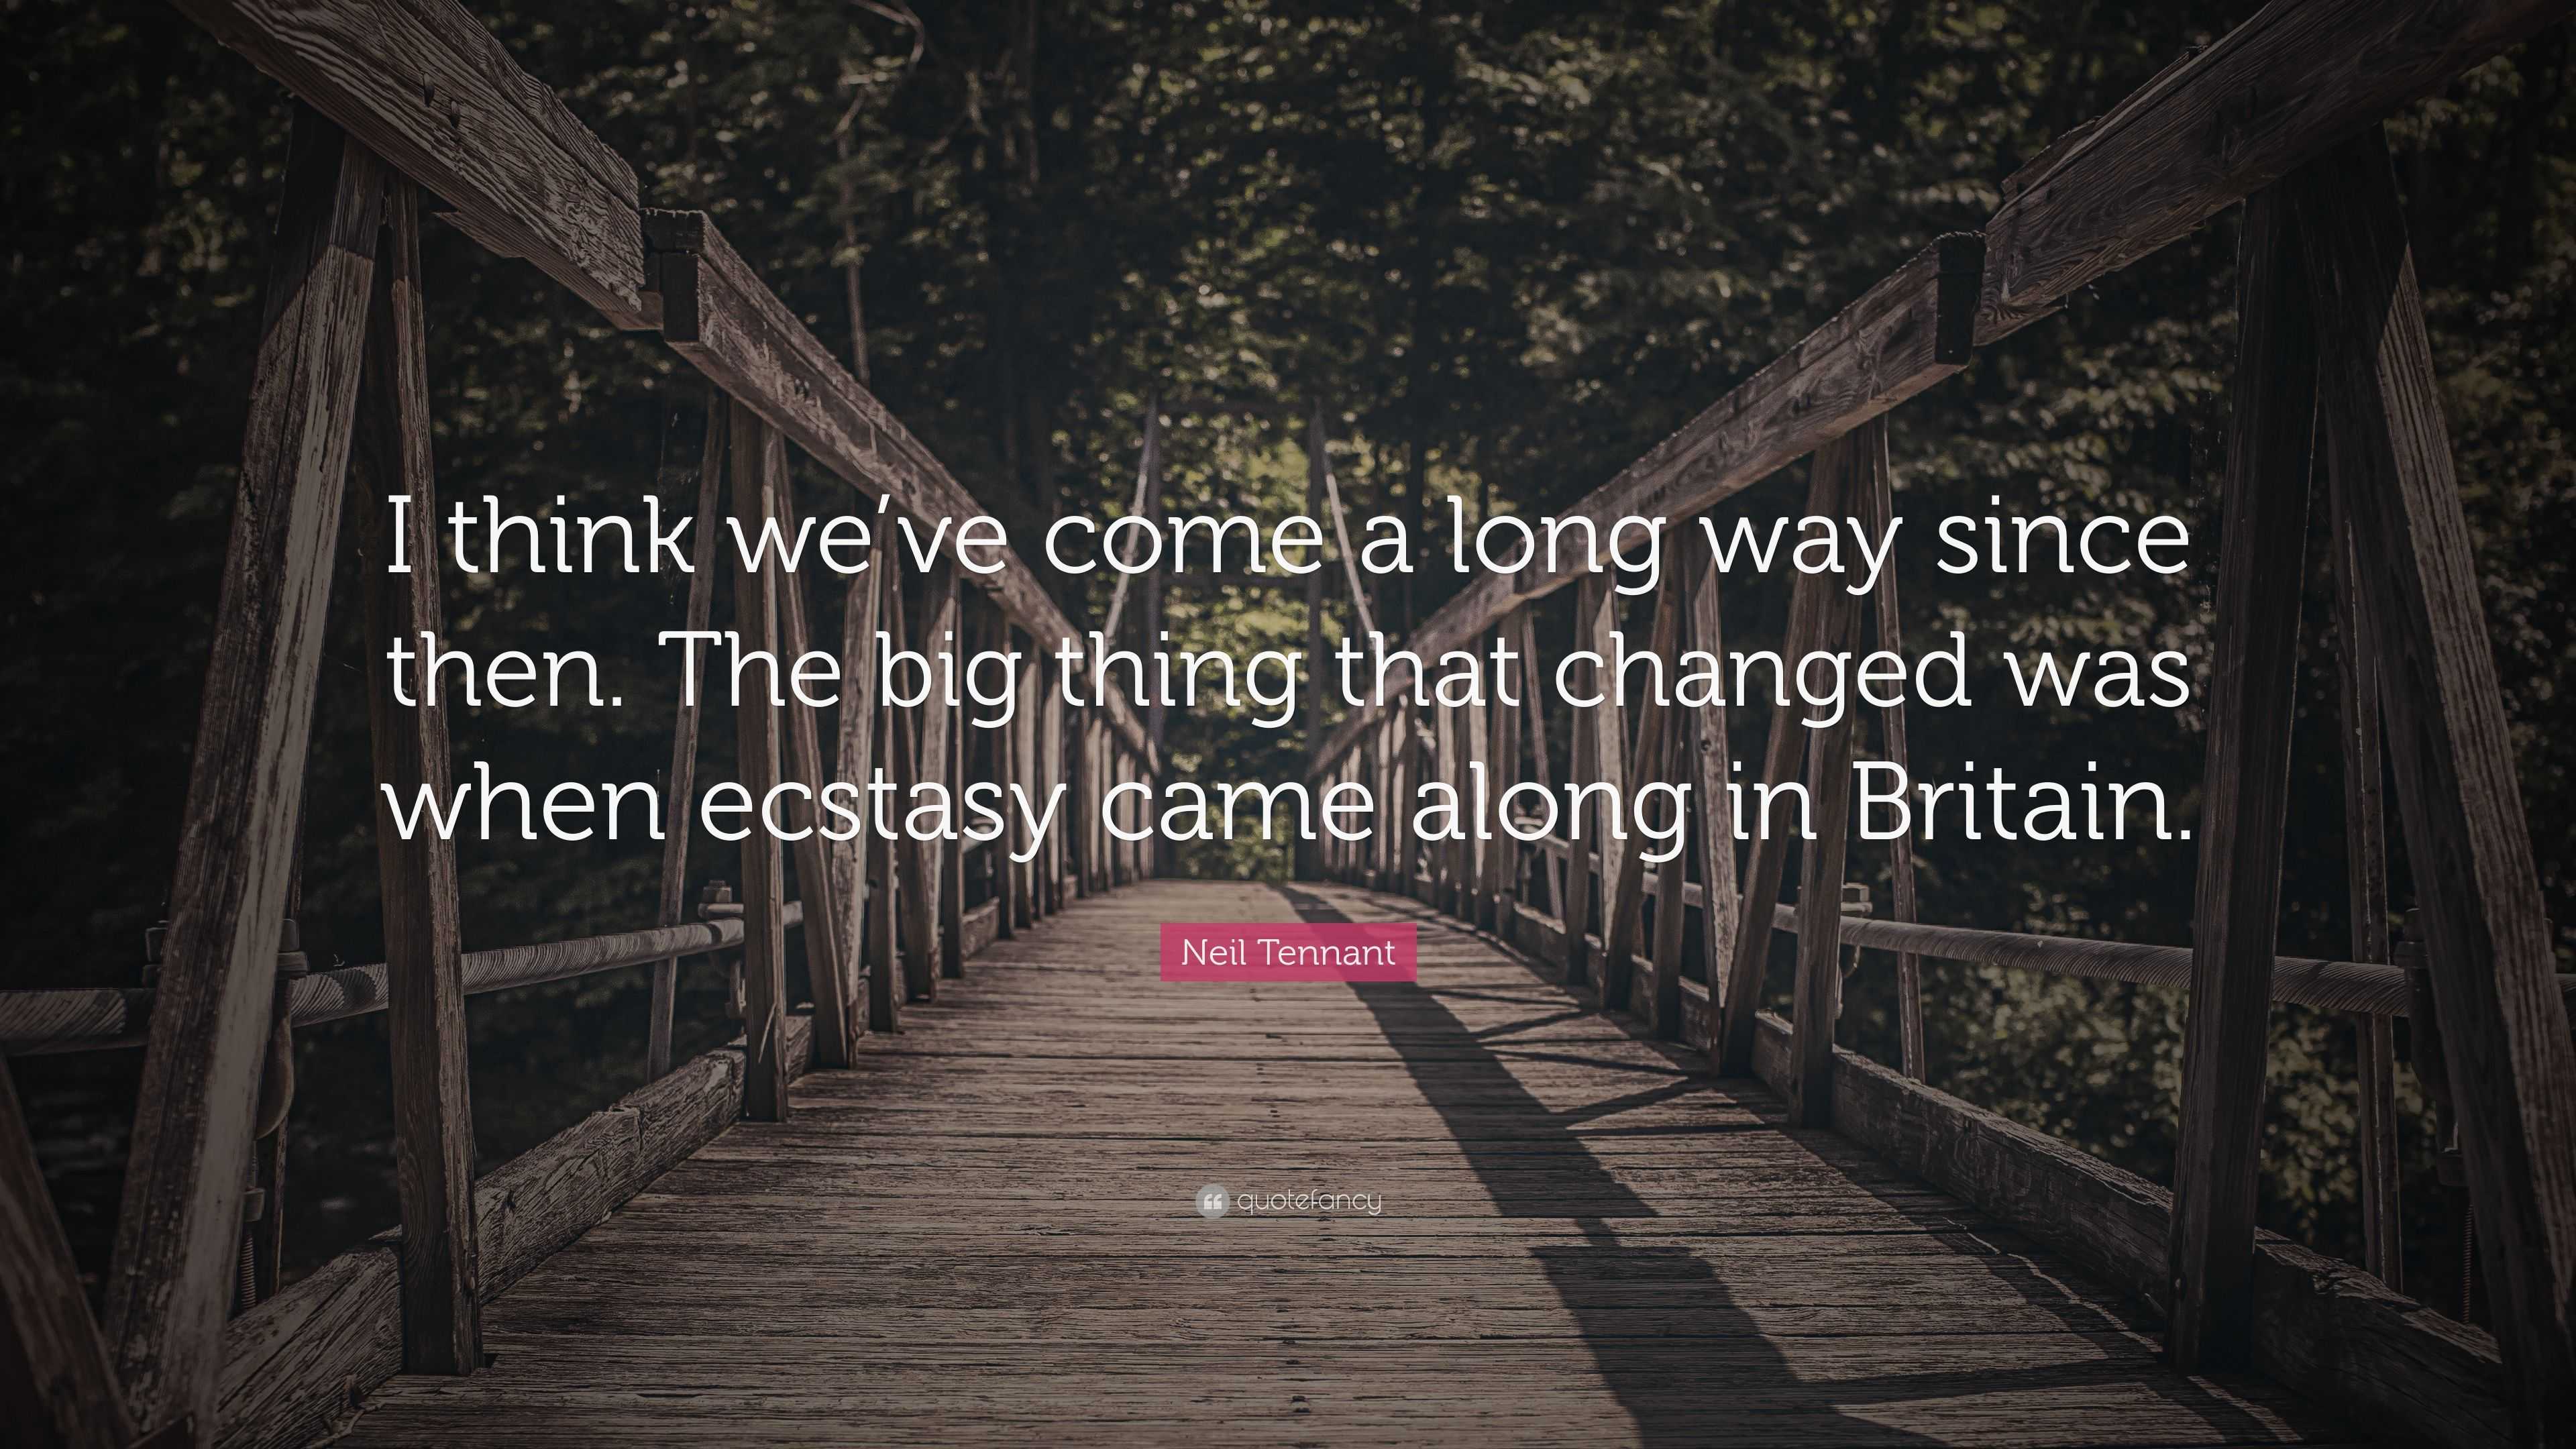 https://quotefancy.com/media/wallpaper/3840x2160/4000483-Neil-Tennant-Quote-I-think-we-ve-come-a-long-way-since-then-The.jpg